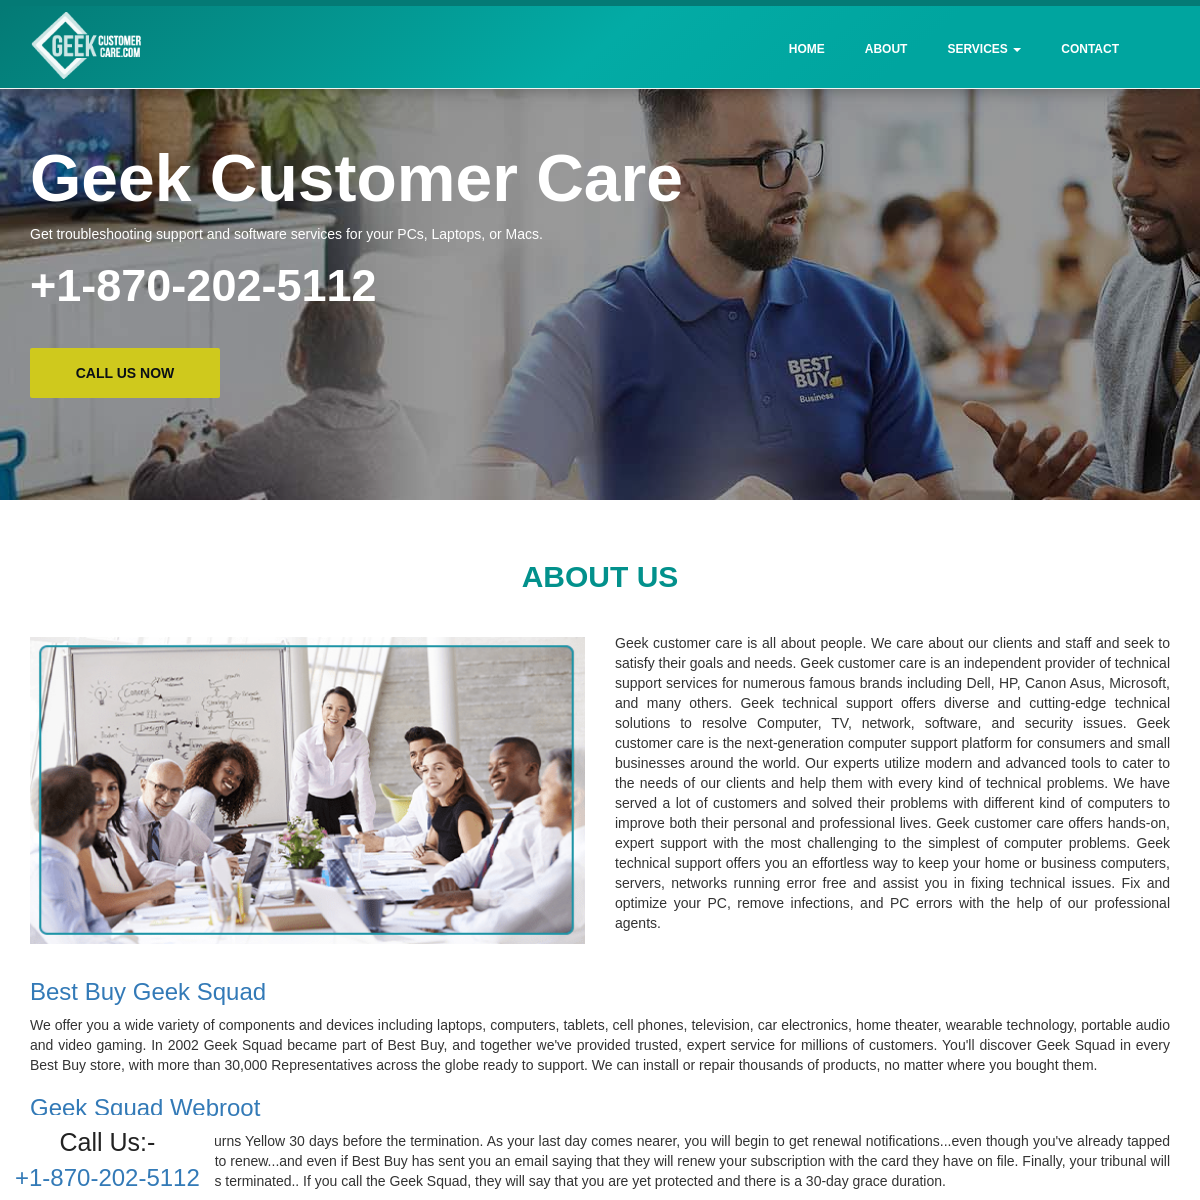 A complete backup of geek-customer-care.com